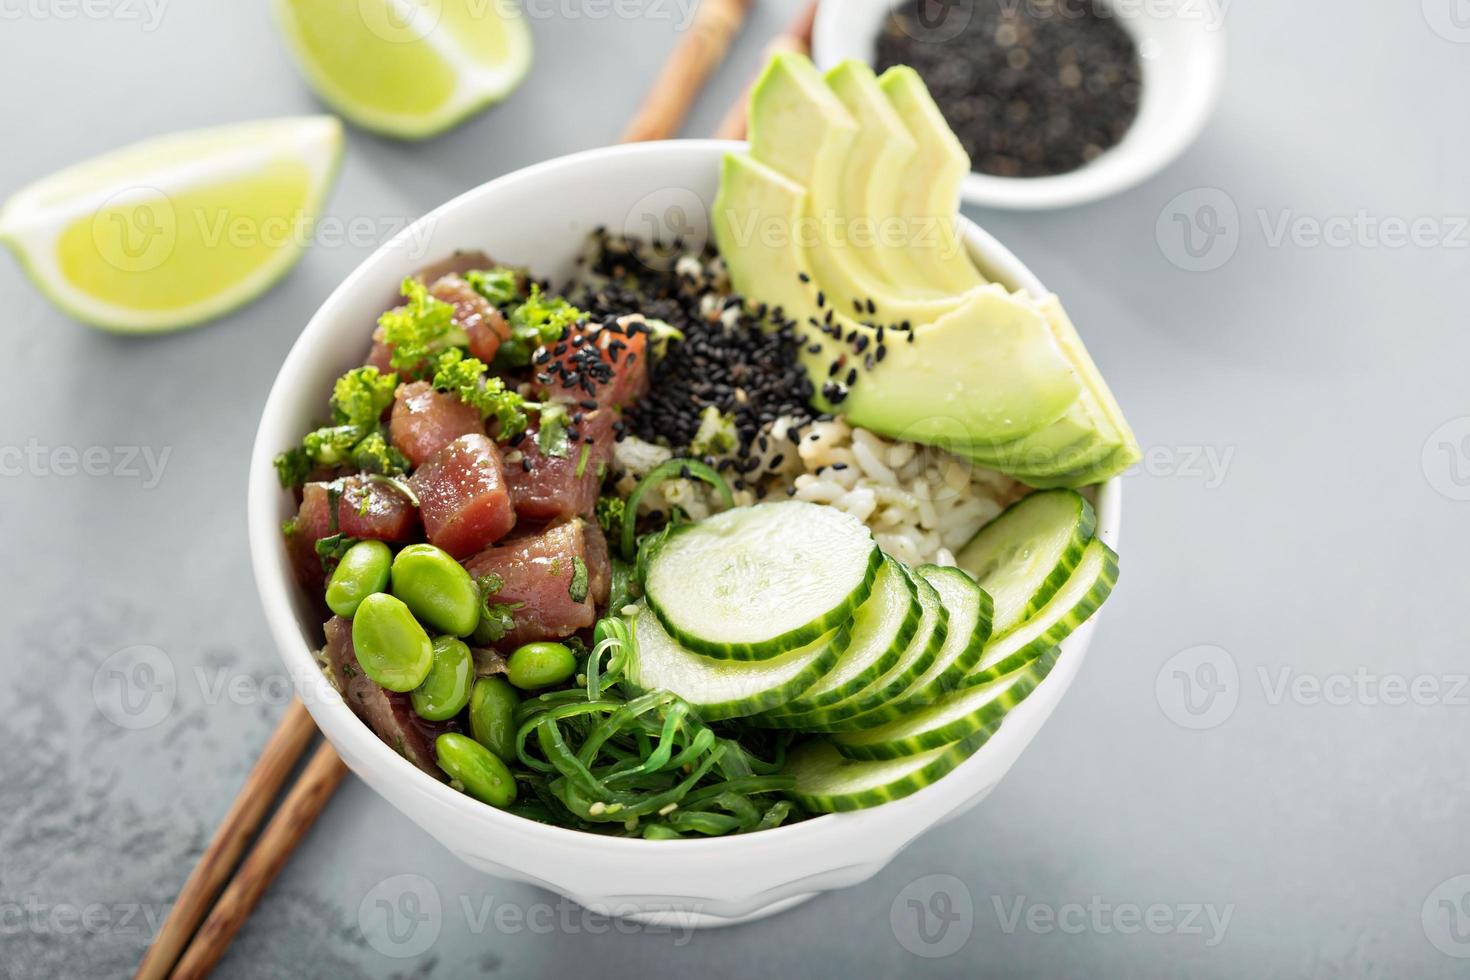 Poke bowl with raw tuna, rice and vegetables photo